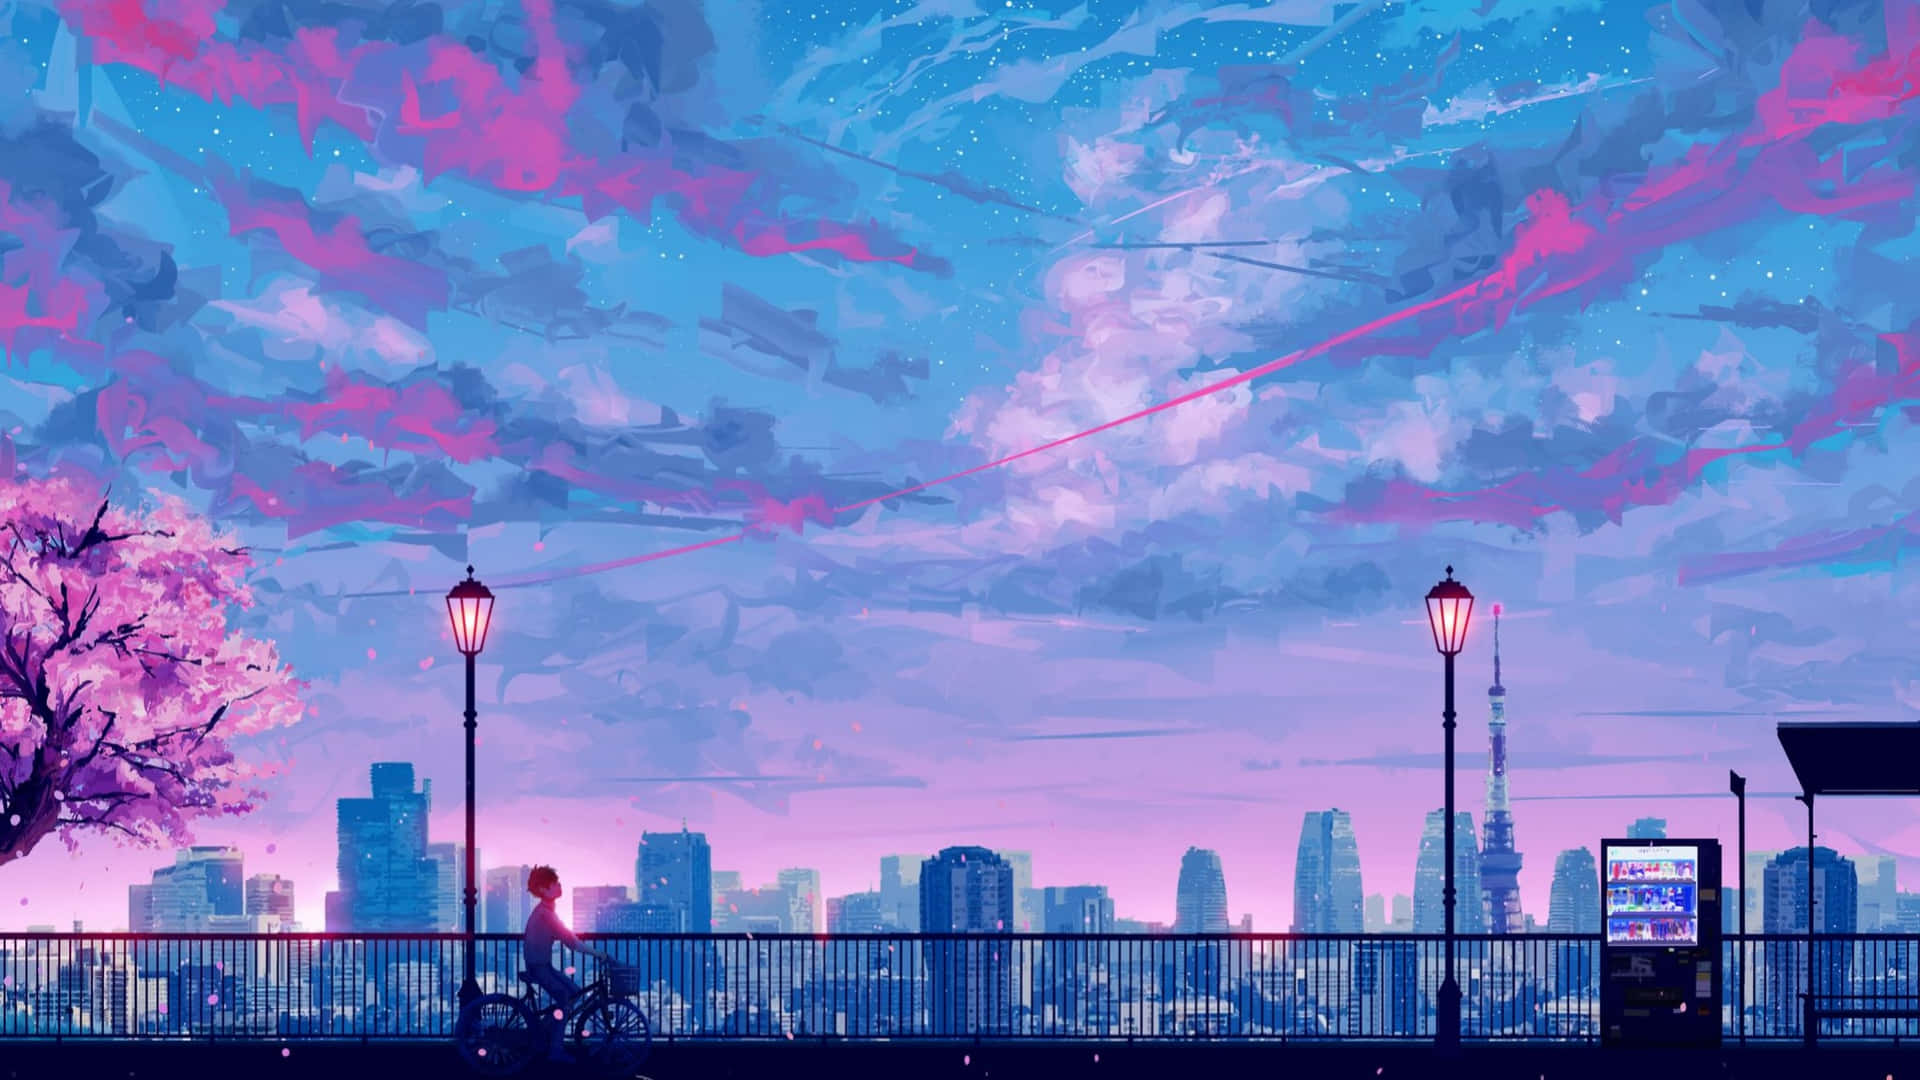 2048x1152 Aesthetic Blue And Pink Anime City Wallpaper